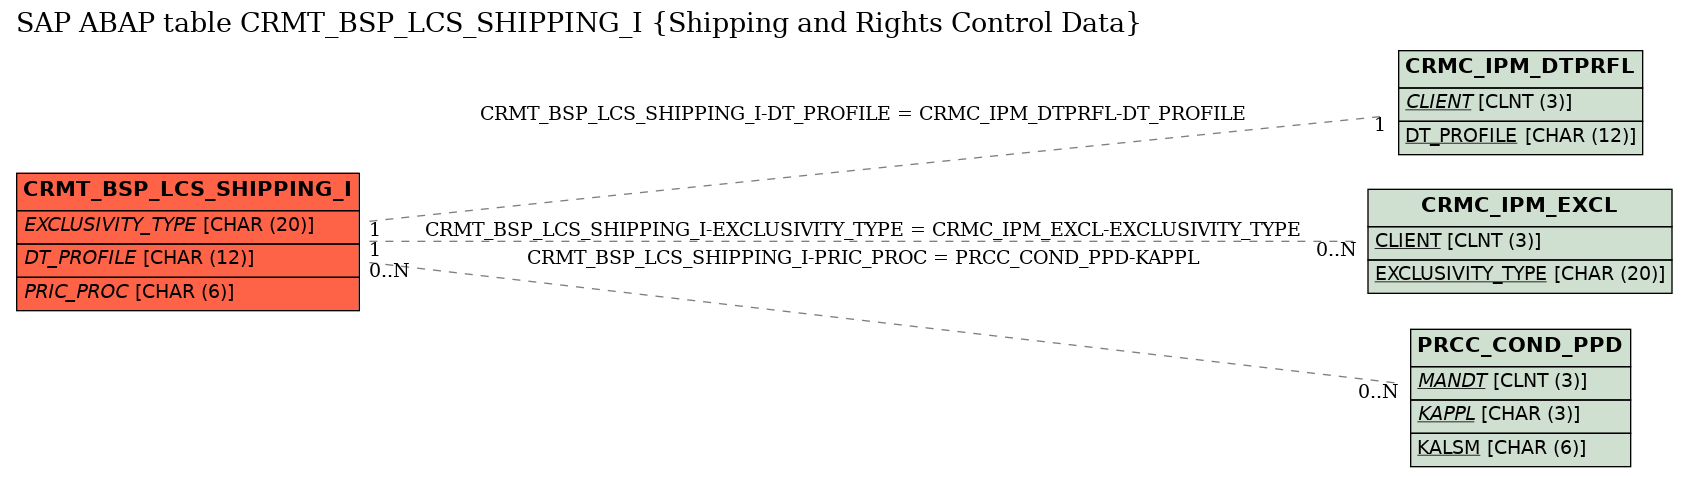 E-R Diagram for table CRMT_BSP_LCS_SHIPPING_I (Shipping and Rights Control Data)